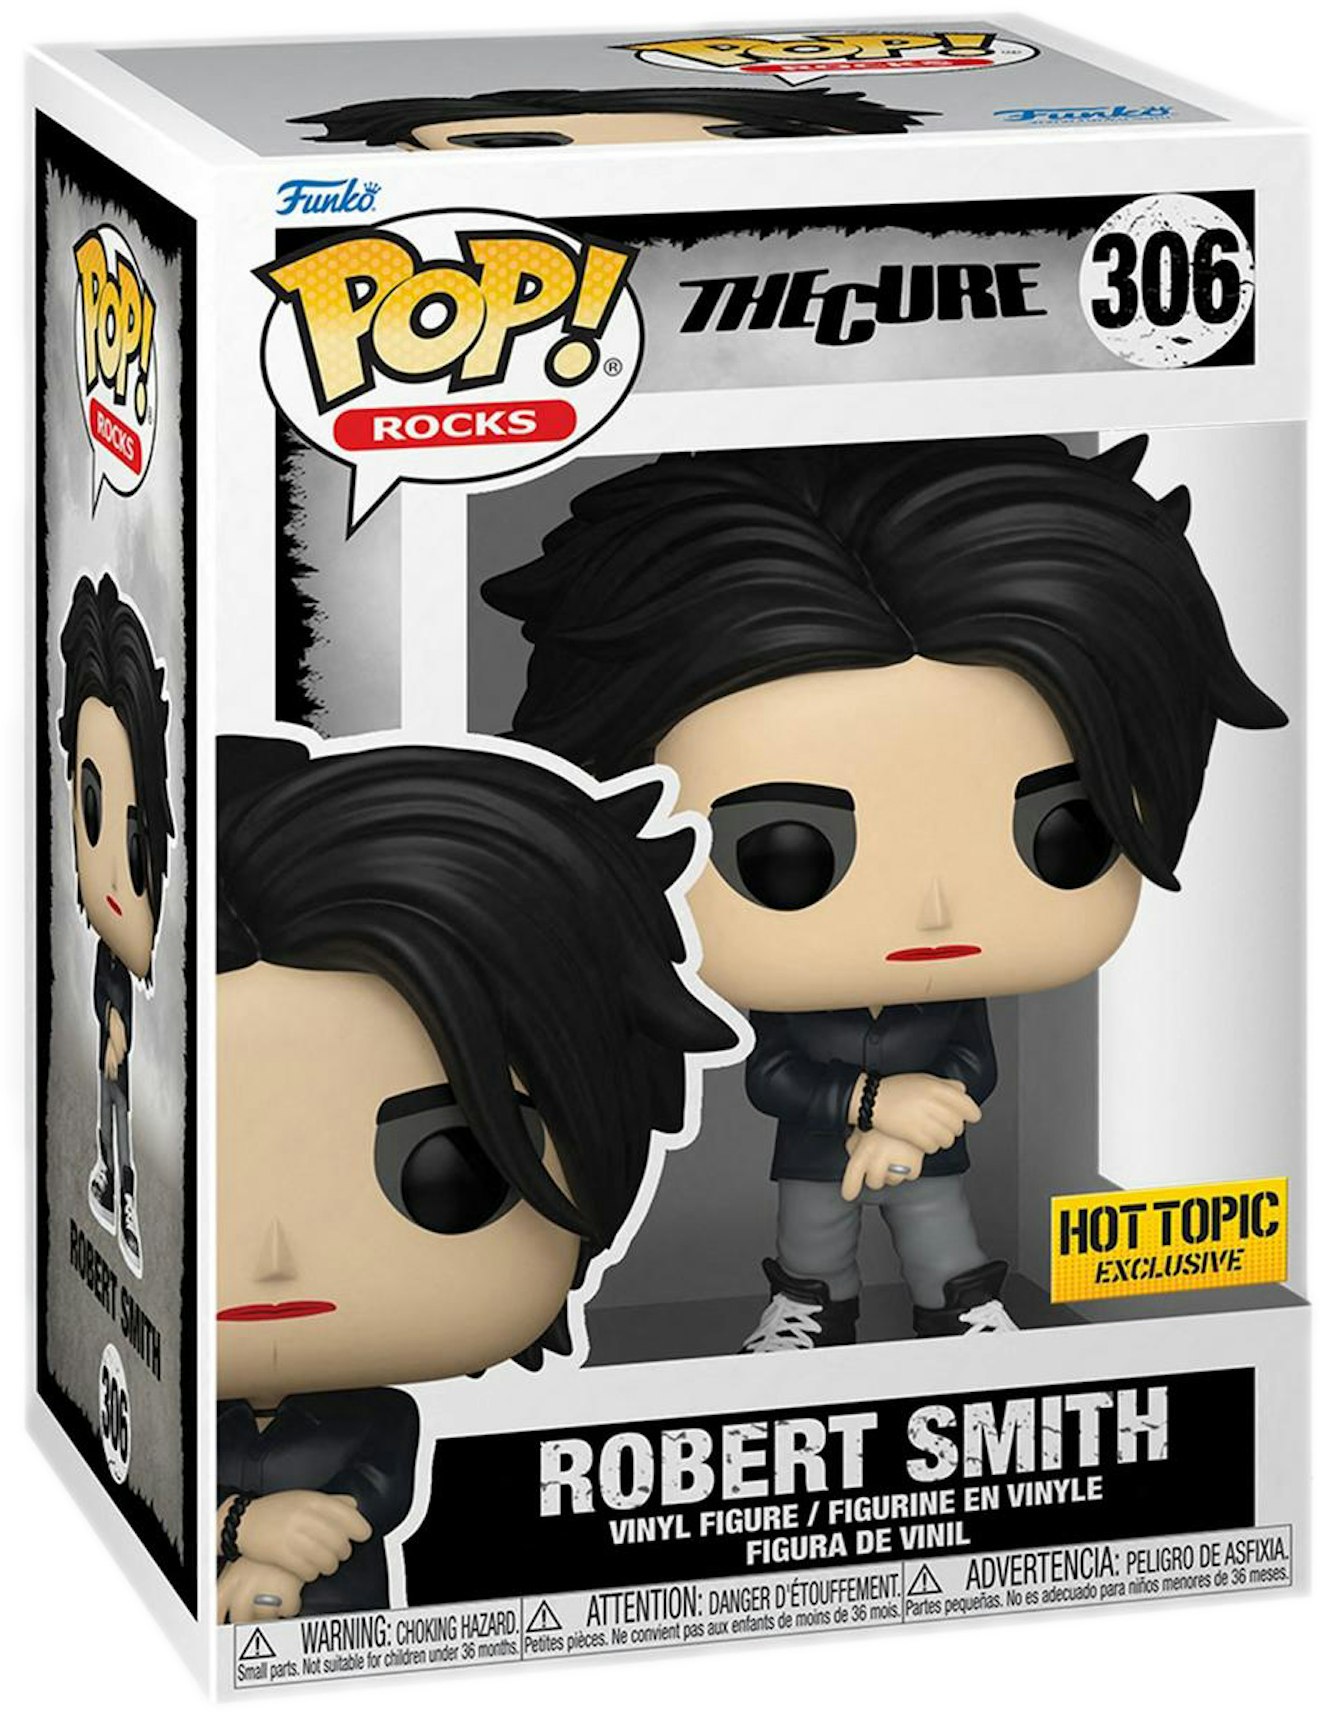 Funko Pop! Rocks The Cure Robert Smith Hot Topic Exclusive Figure #306 US